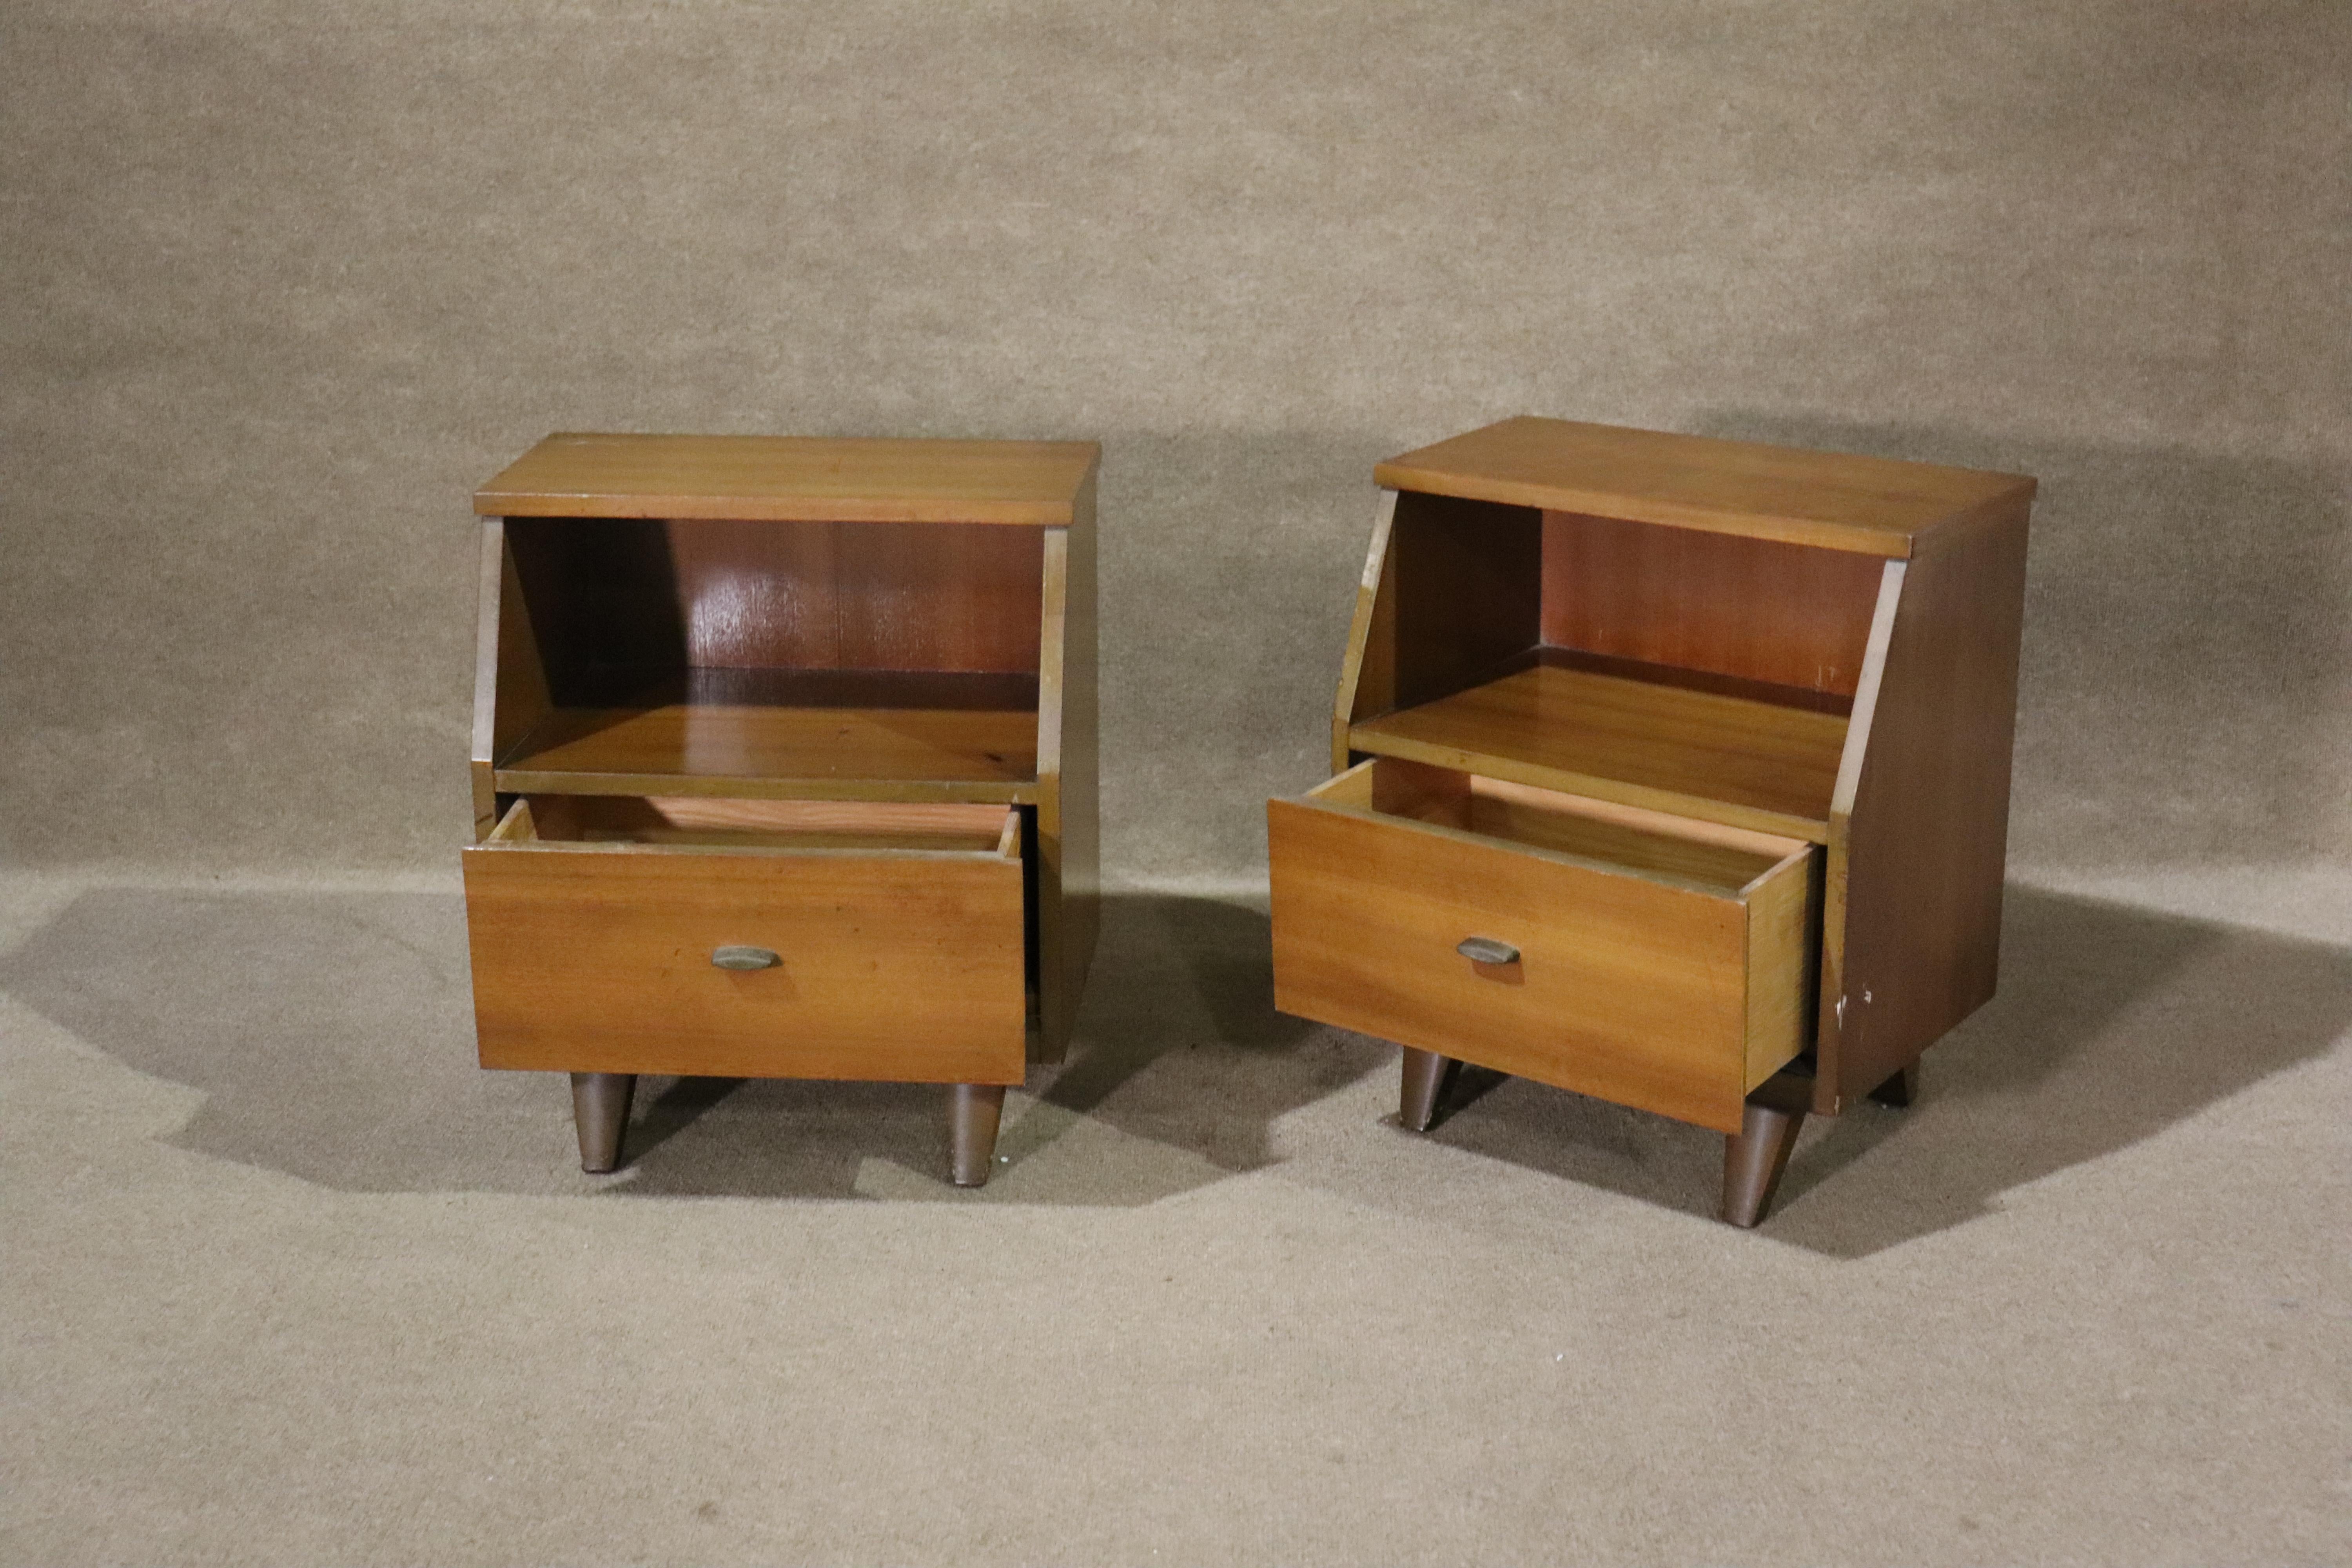 Pair of vintage modern end tables with drawer and open cabinet storage. Great for the bedroom.
Please confirm location NY or NJ